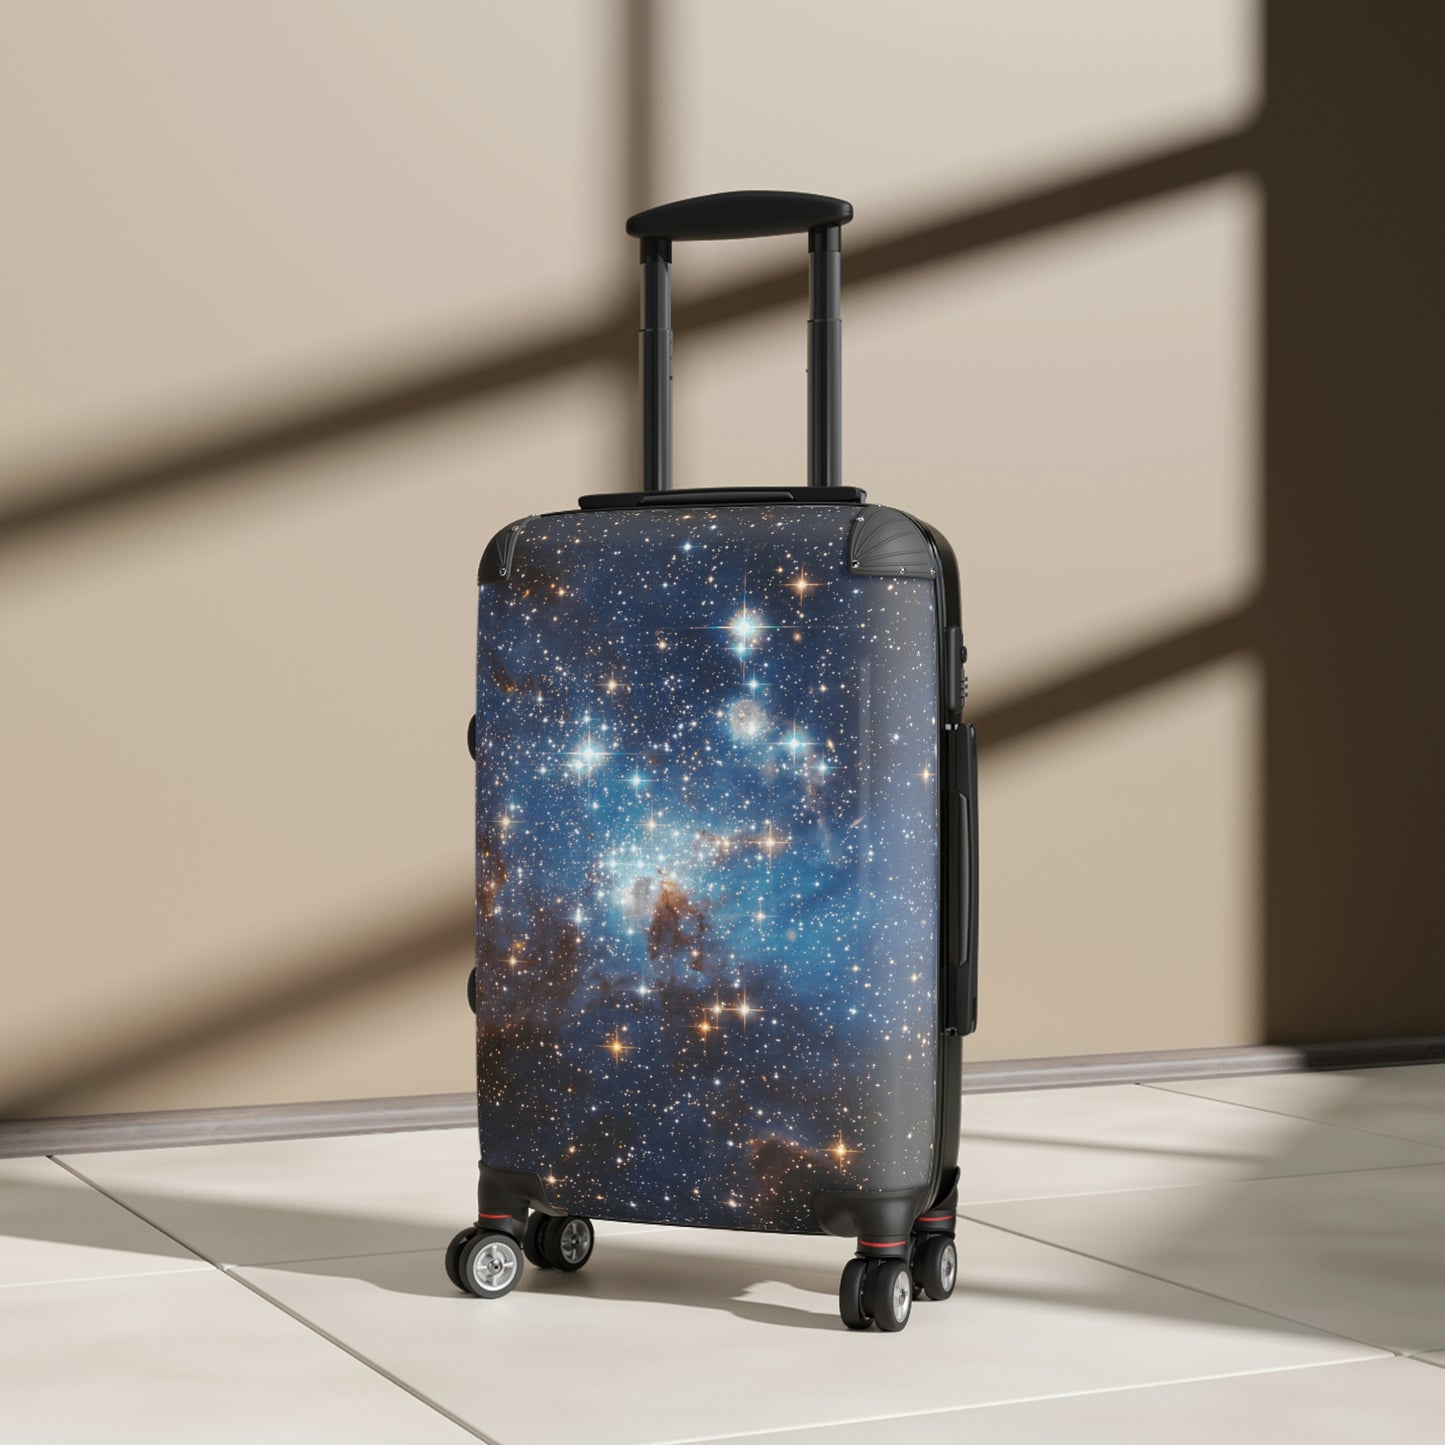 Space Galaxy Cabin Suitcase Luggage, Stars Nebula Carry On Travel Bag Rolling Spinner with Lock Decorative Designer Hard Shell Wheels Case Starcove Fashion